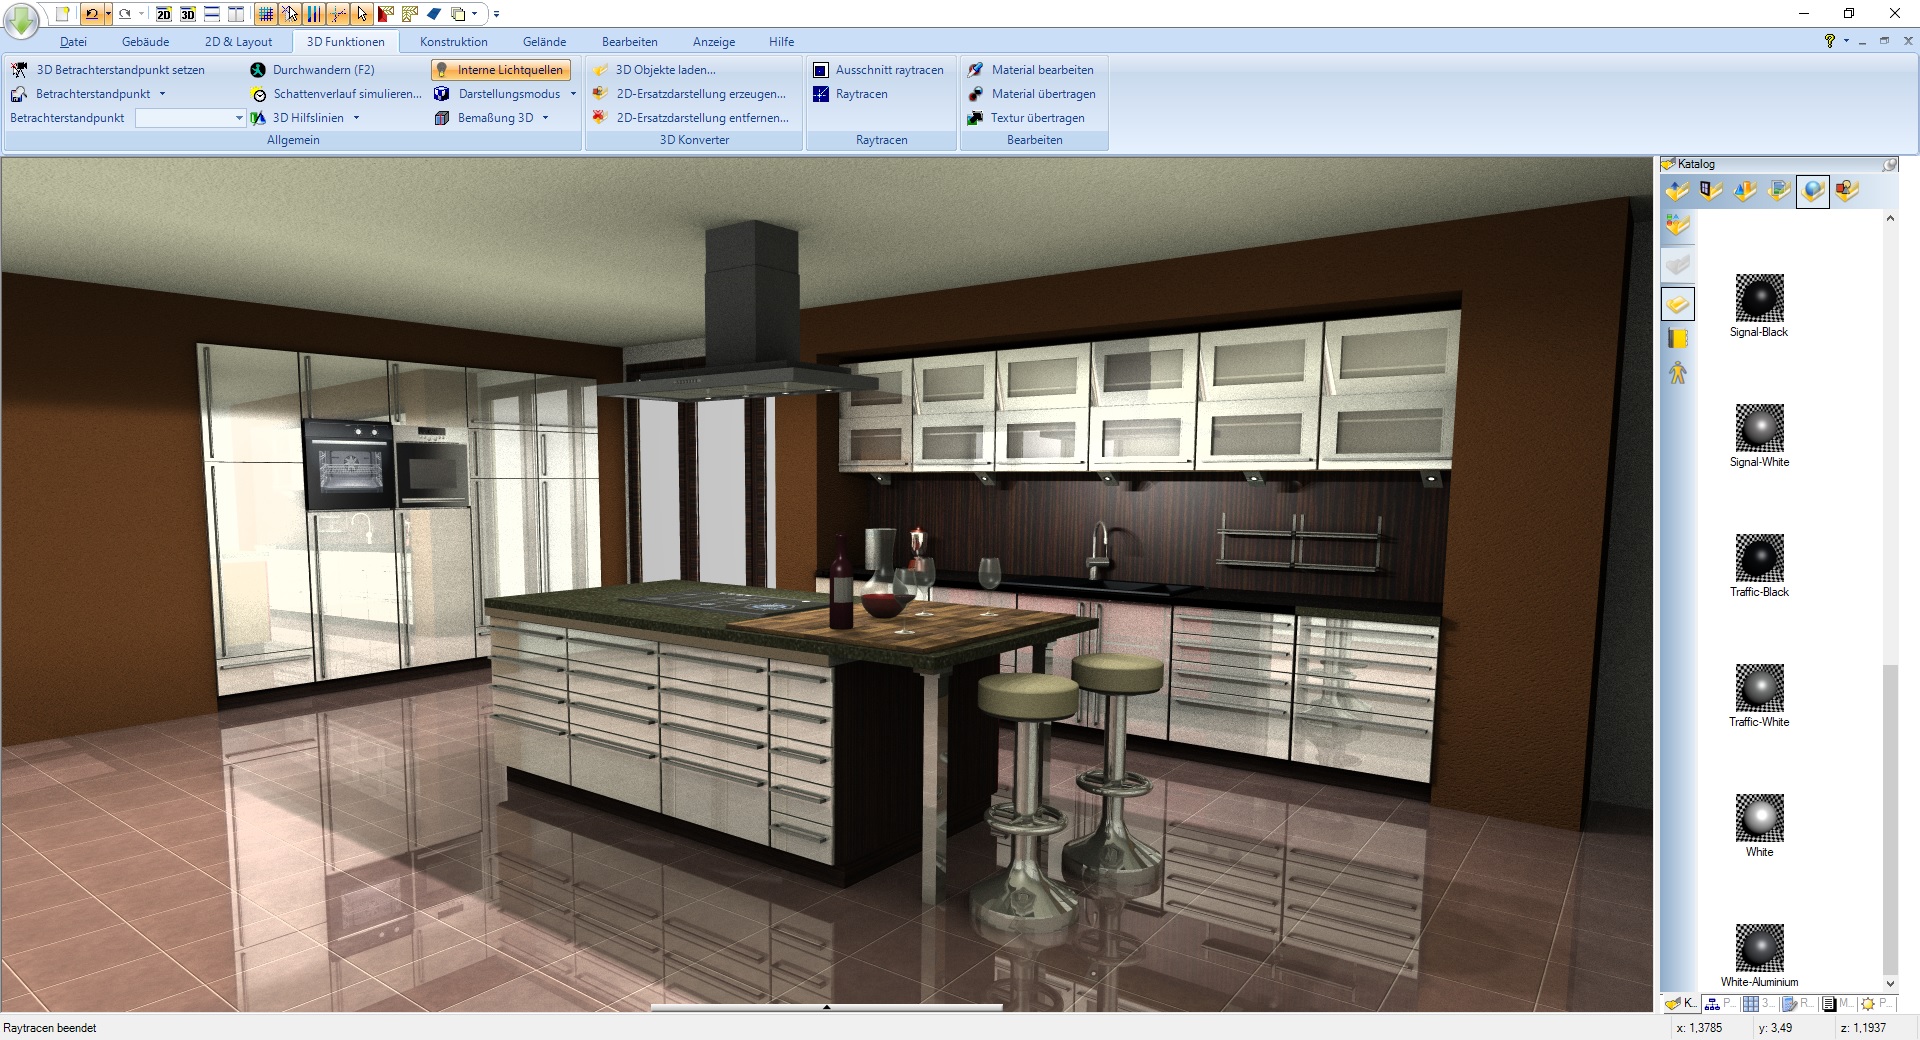 Home Architect - Design your floor plans in 3D - Ultimate Edition screenshot